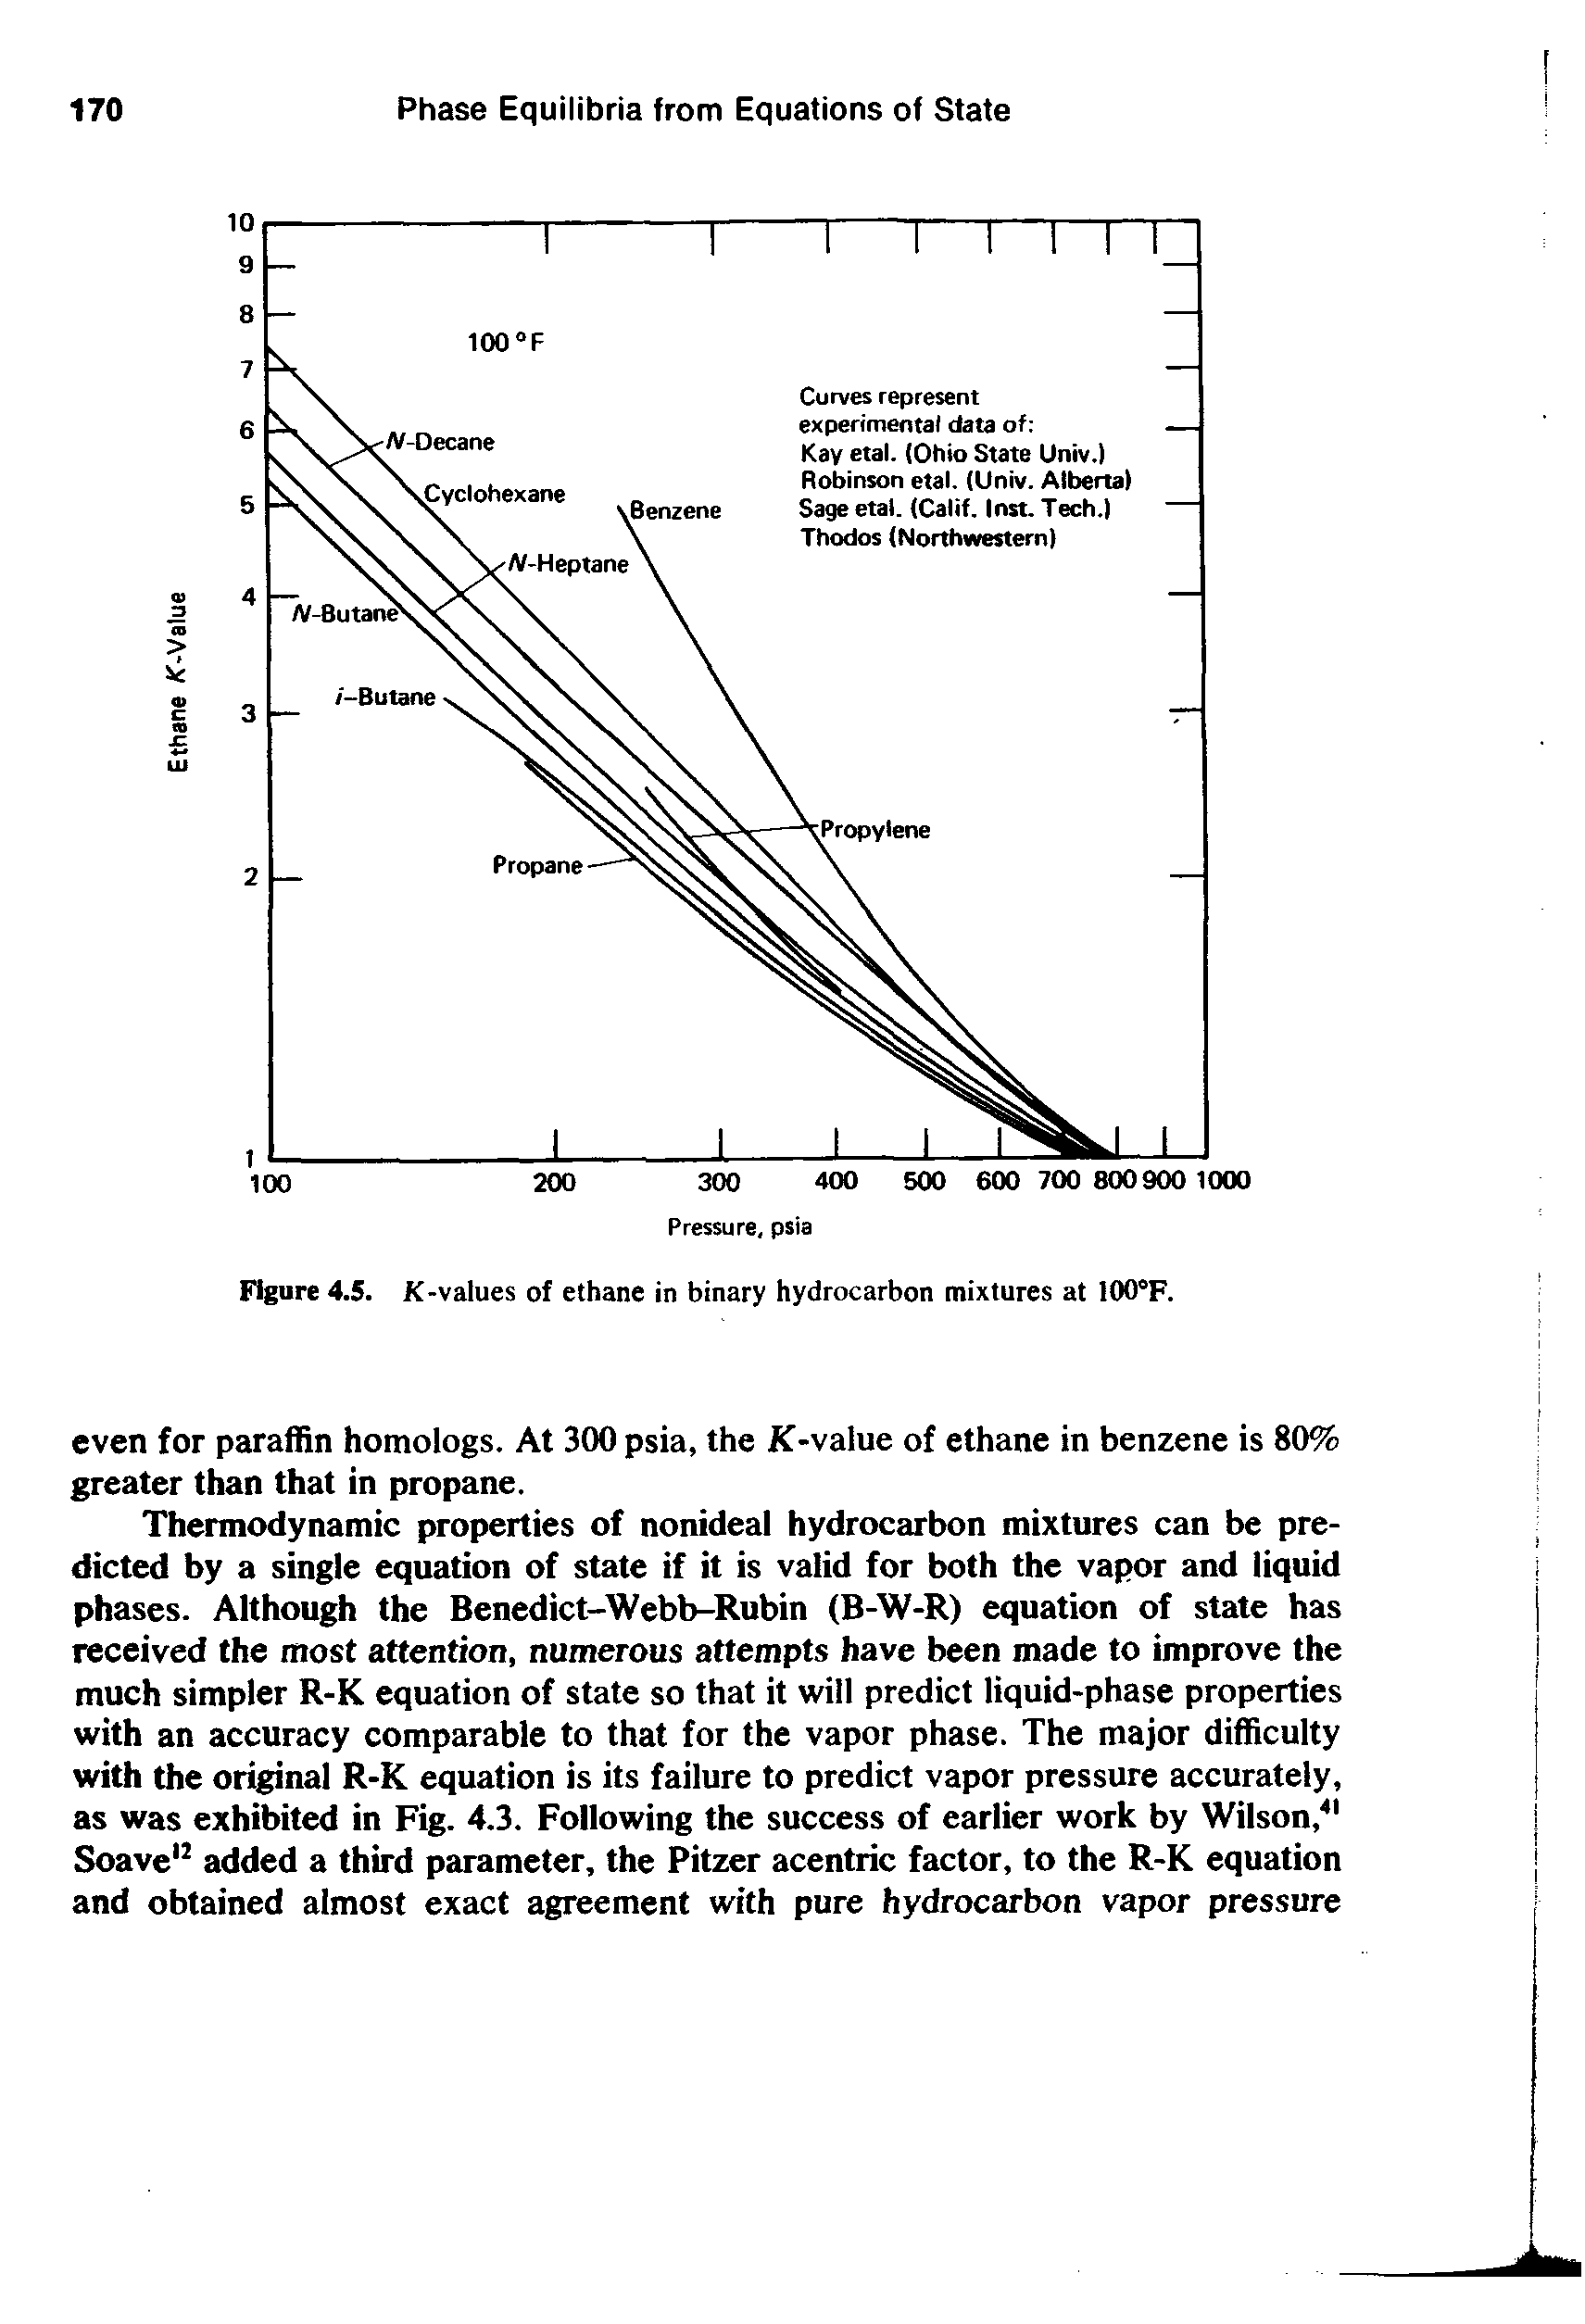 Figure 4.5. K>values of ethane in binary hydrocarbon mixtures at 100 F.